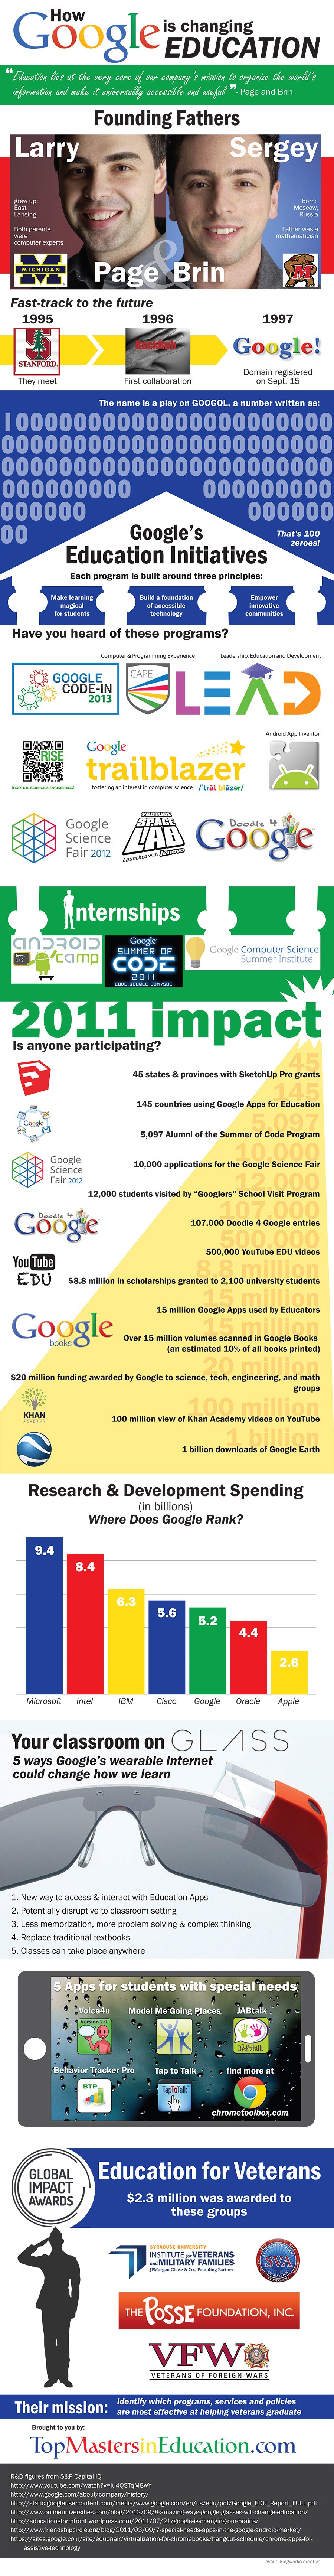 How Google is Changing Education Infographic